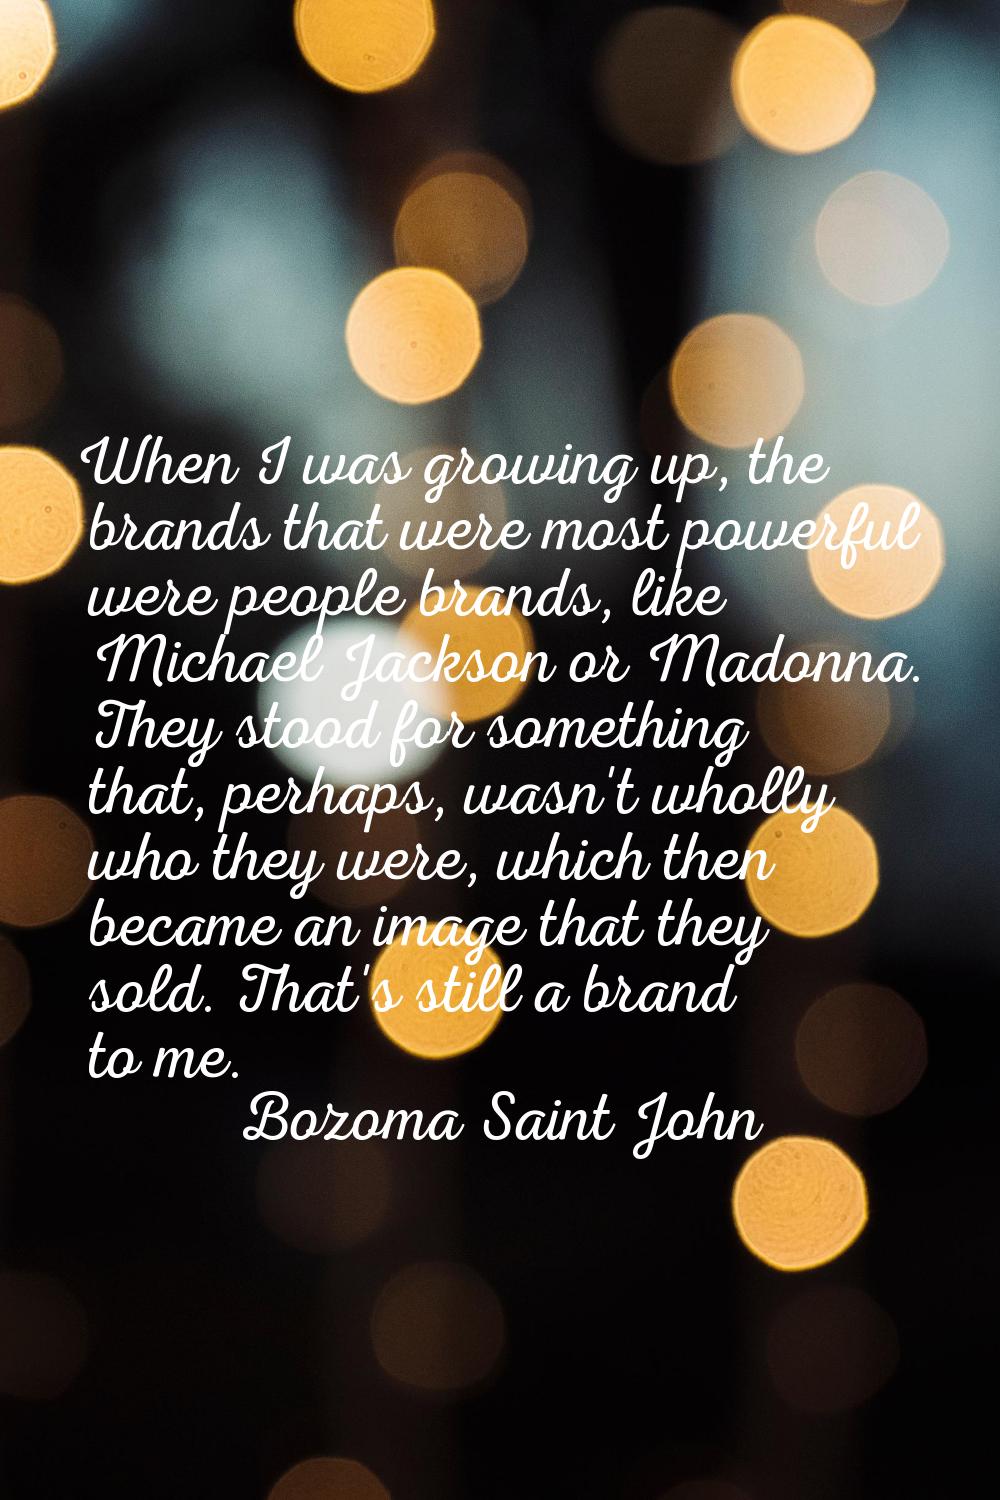 When I was growing up, the brands that were most powerful were people brands, like Michael Jackson 